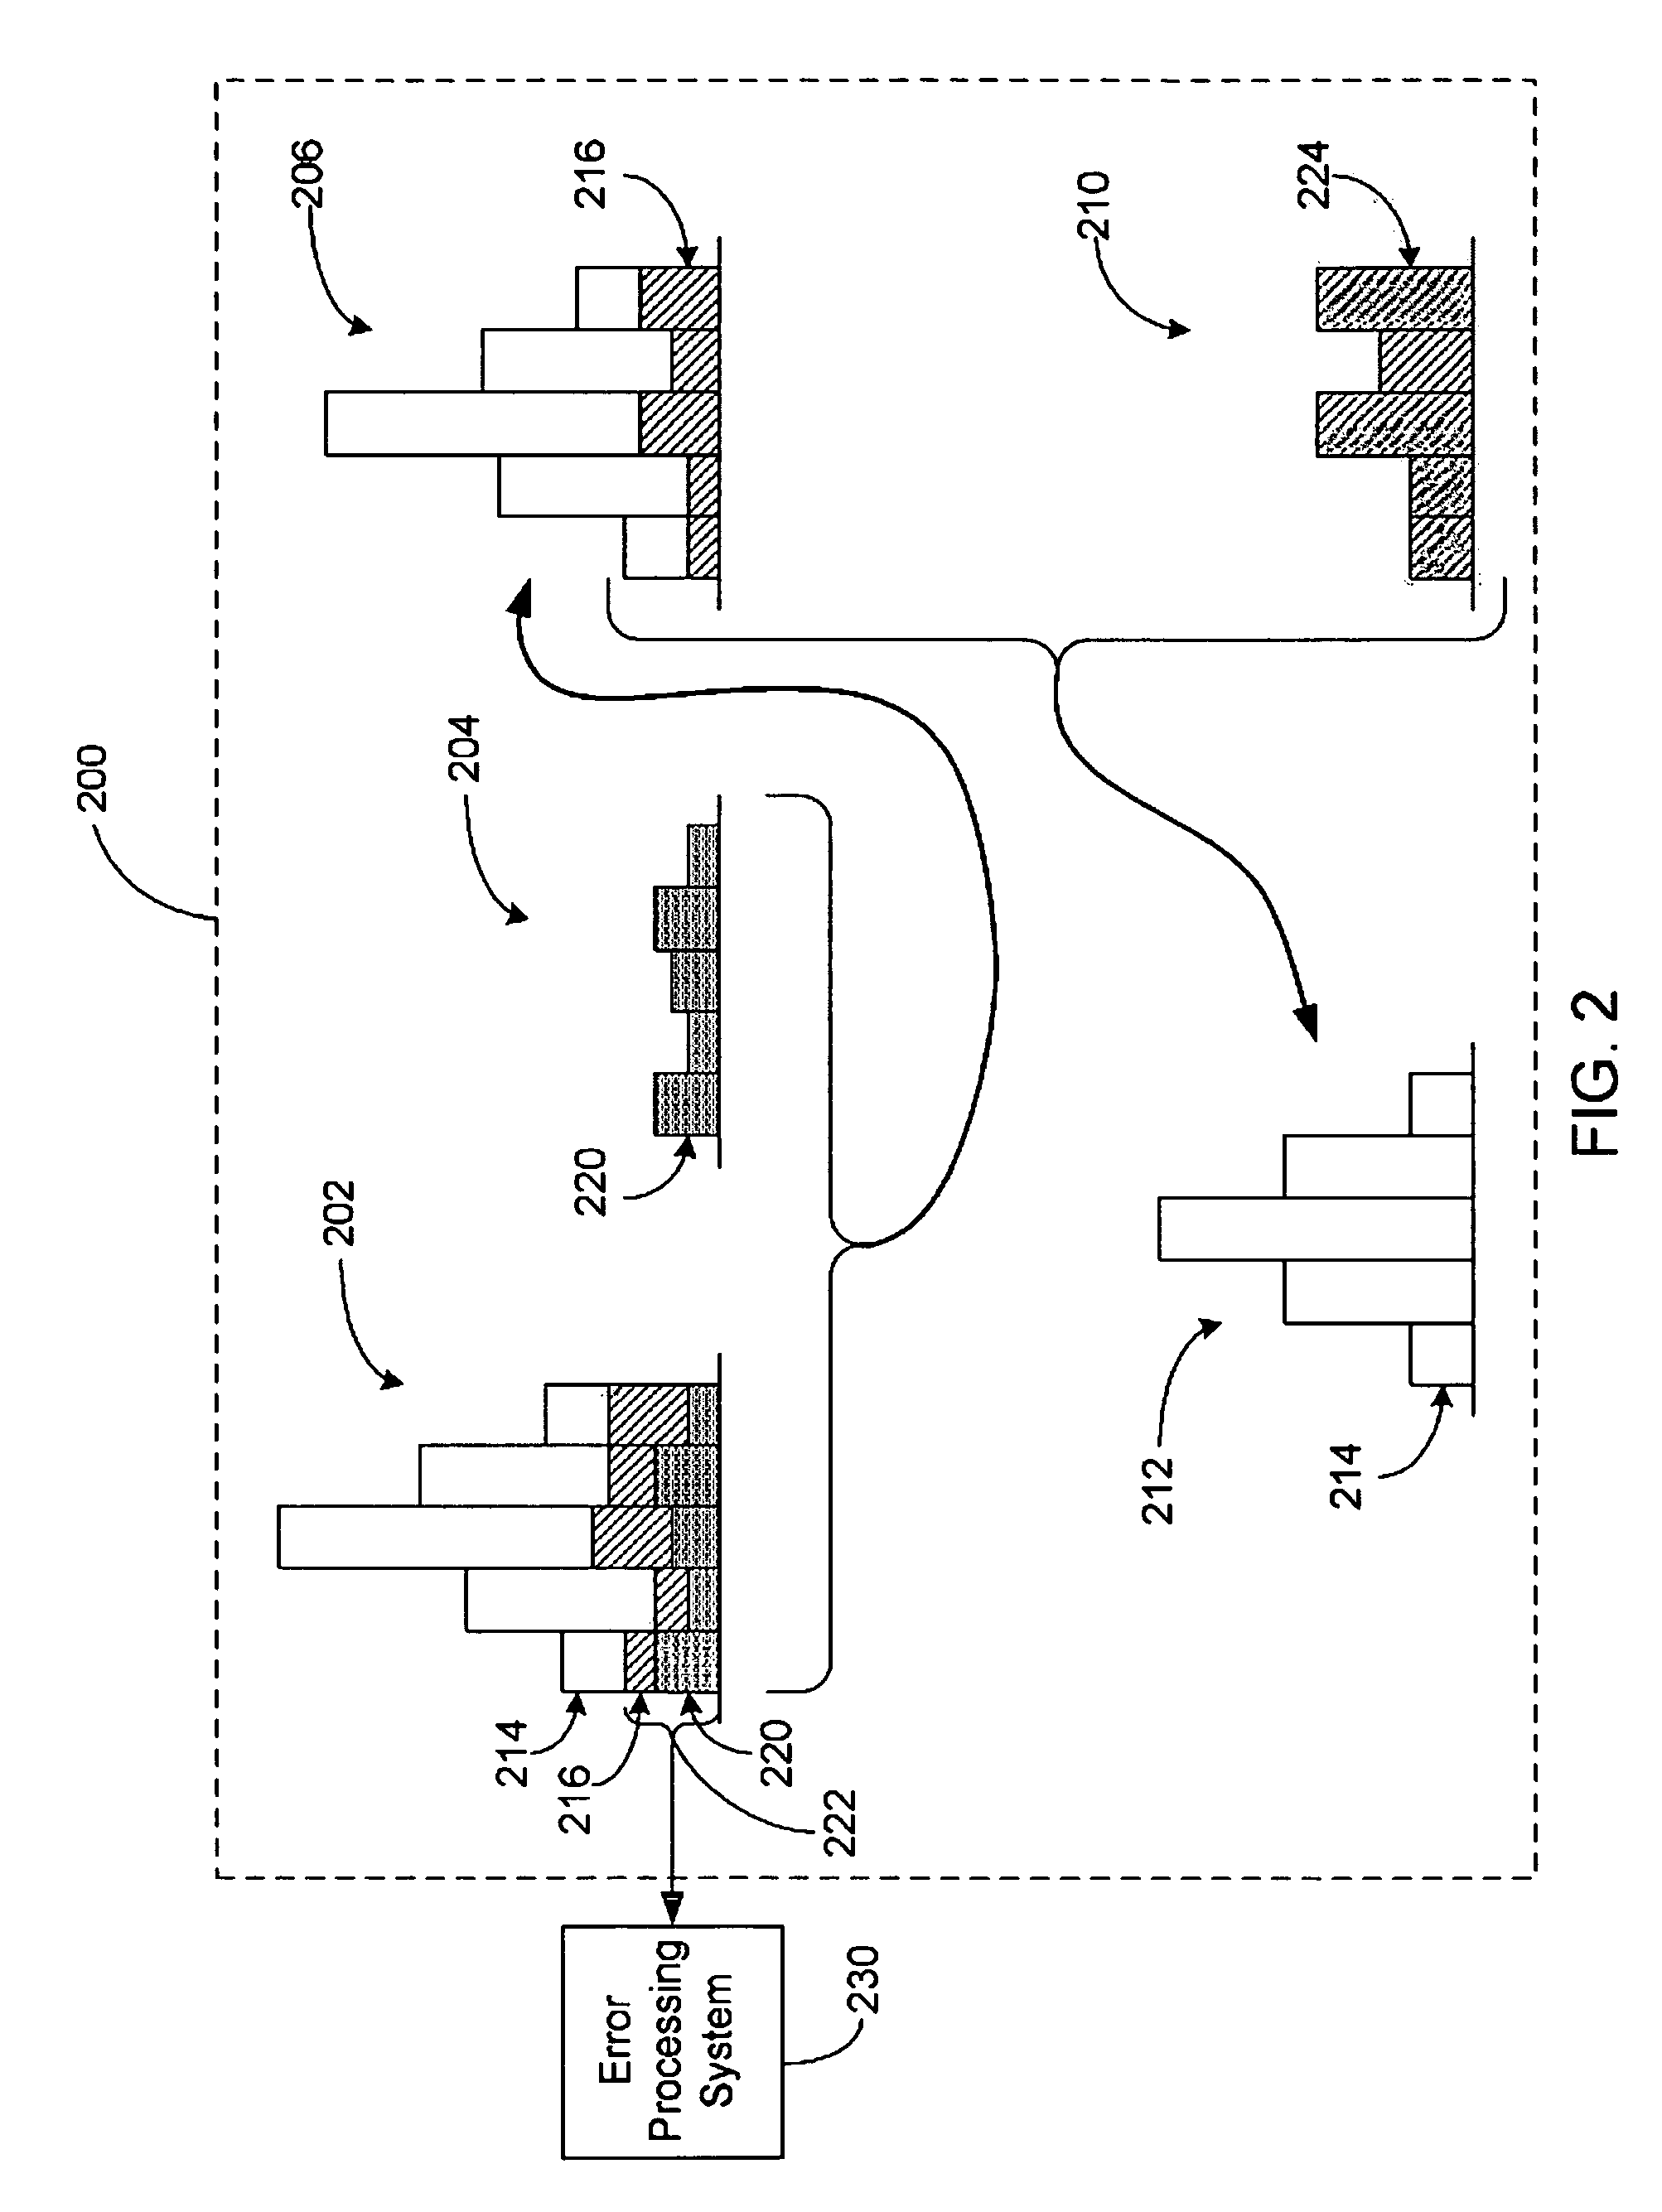 System and methods for improving signal/noise ratio for signal detectors